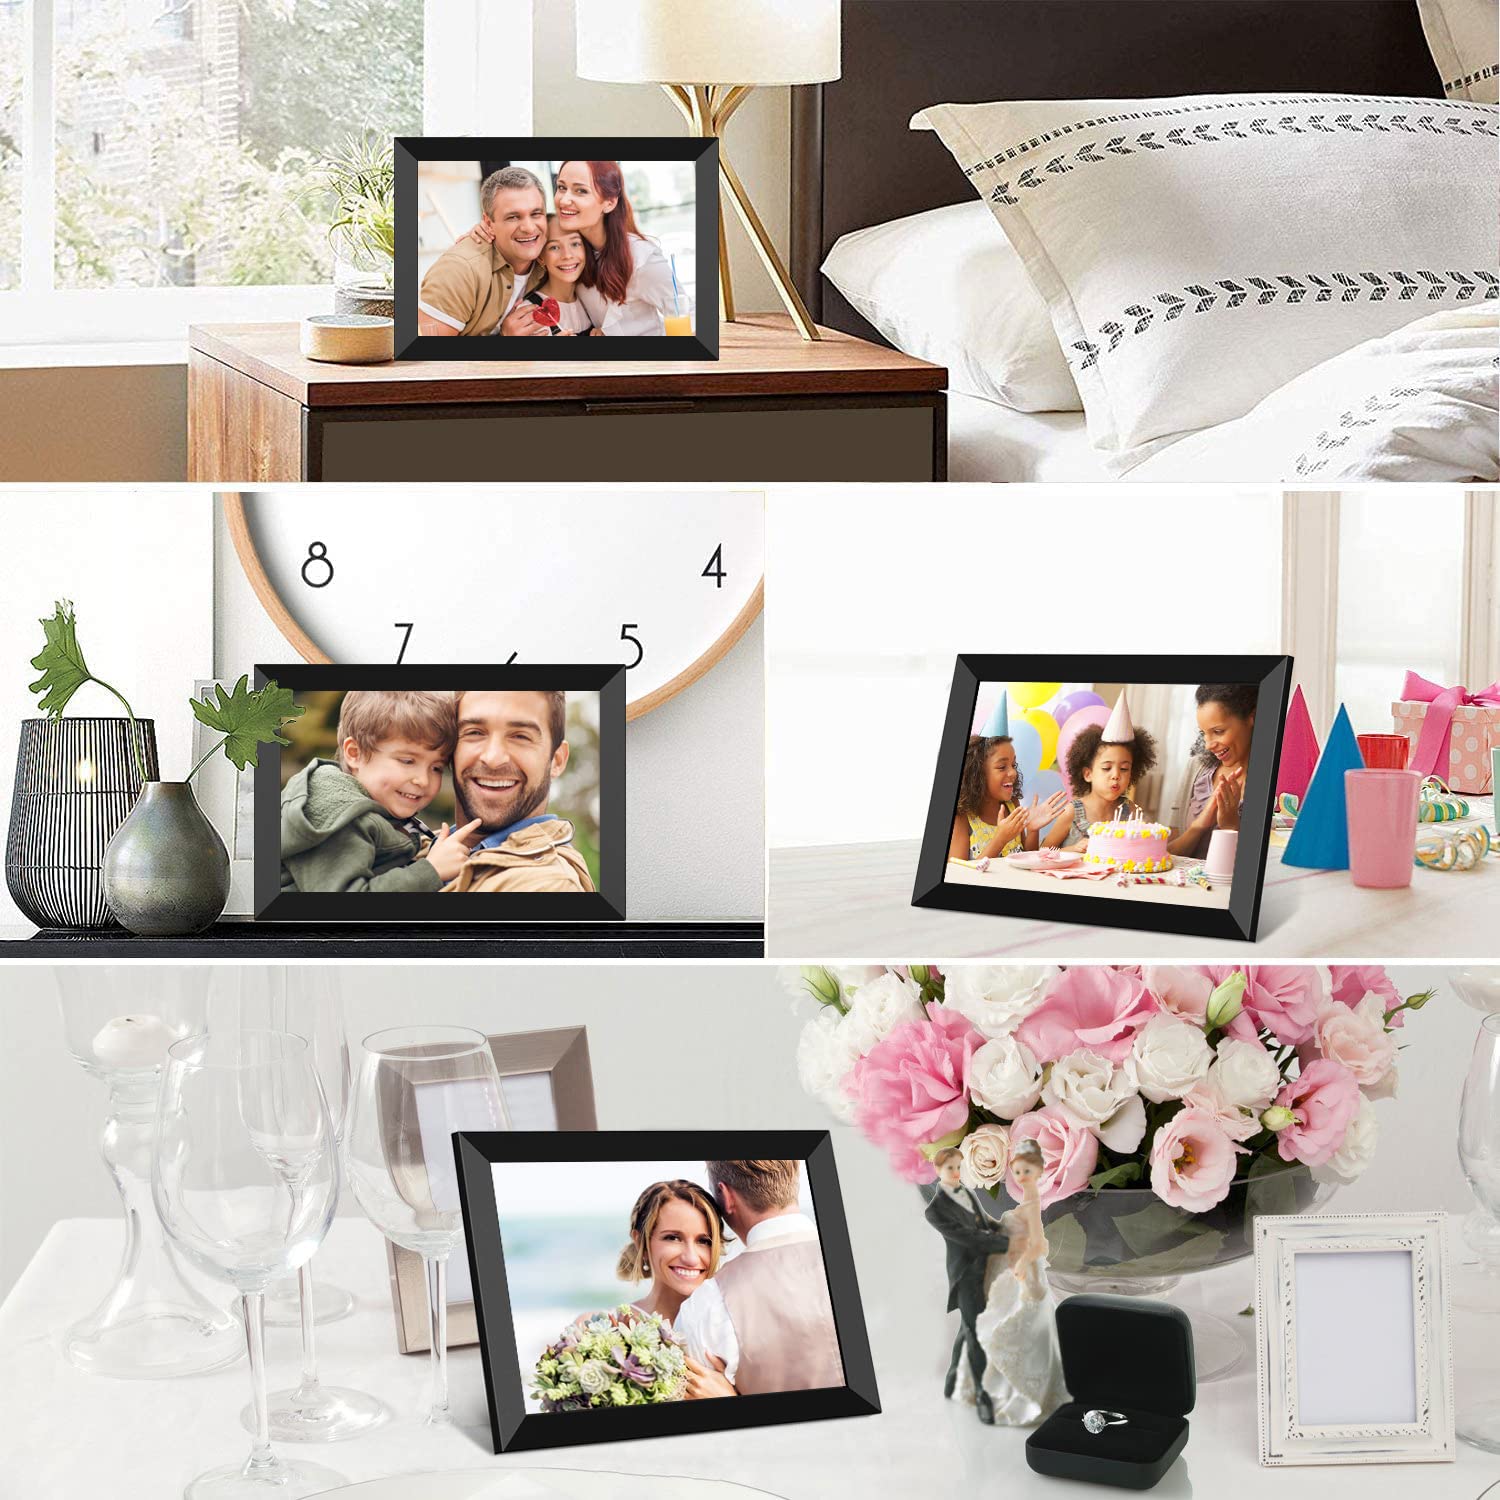 Digital Photo Frames,Newest UI Design YENOCK 8.2 inch 1920 x 1200 FHD High Resolution Full IPS Photo/Music/Video Player Calendar Alarm with Remote Control Digital Picture Frame